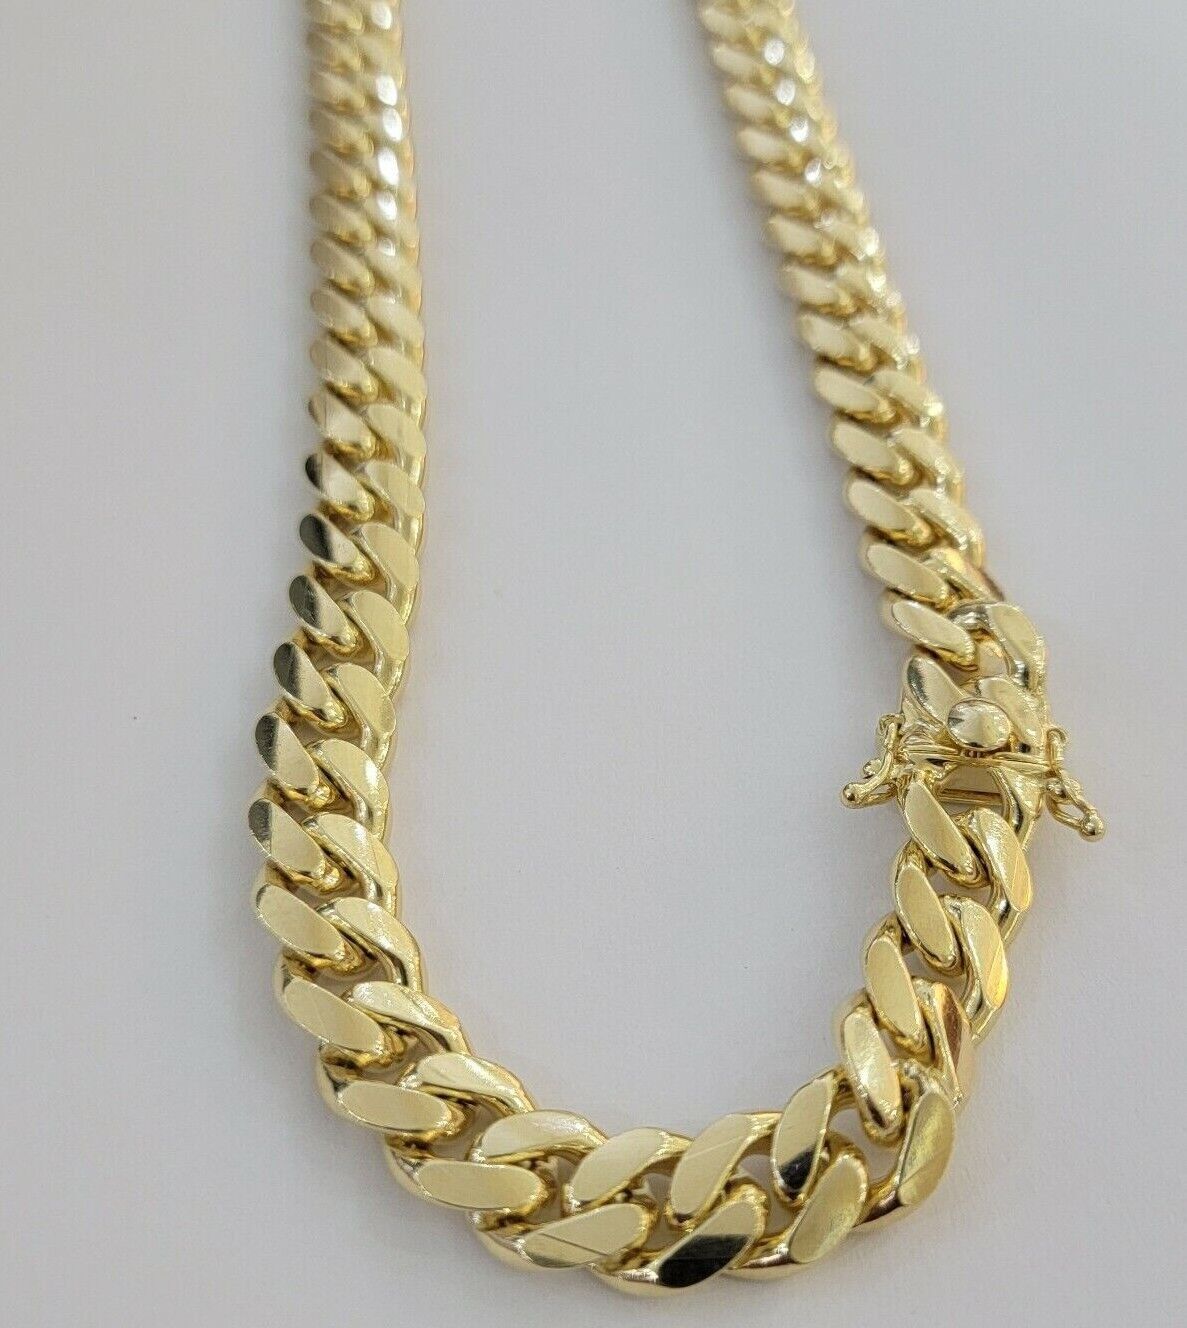 10k 15mm Miami Cuban Link Chain Necklace Yellow Gold 22-26 Inch Mens SOLID 10kt